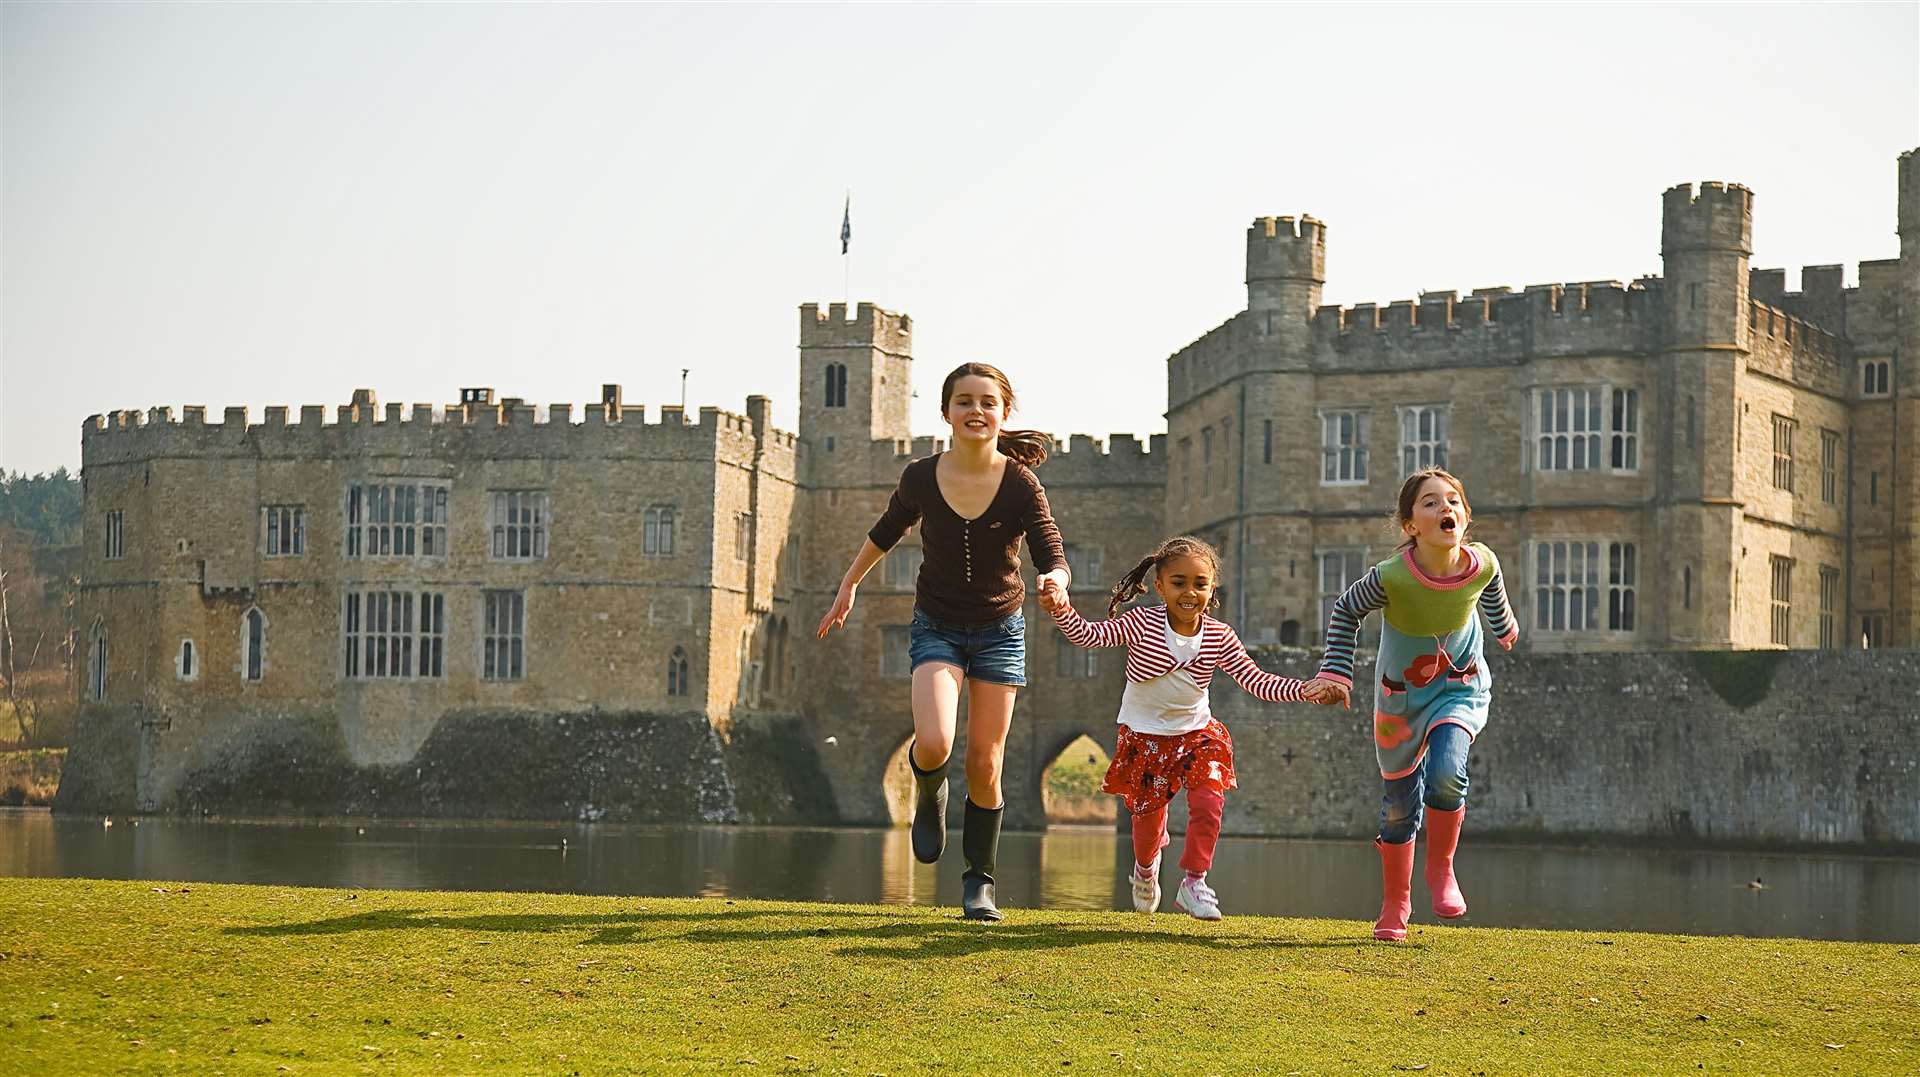 There is something for everyone at Leeds Castle!